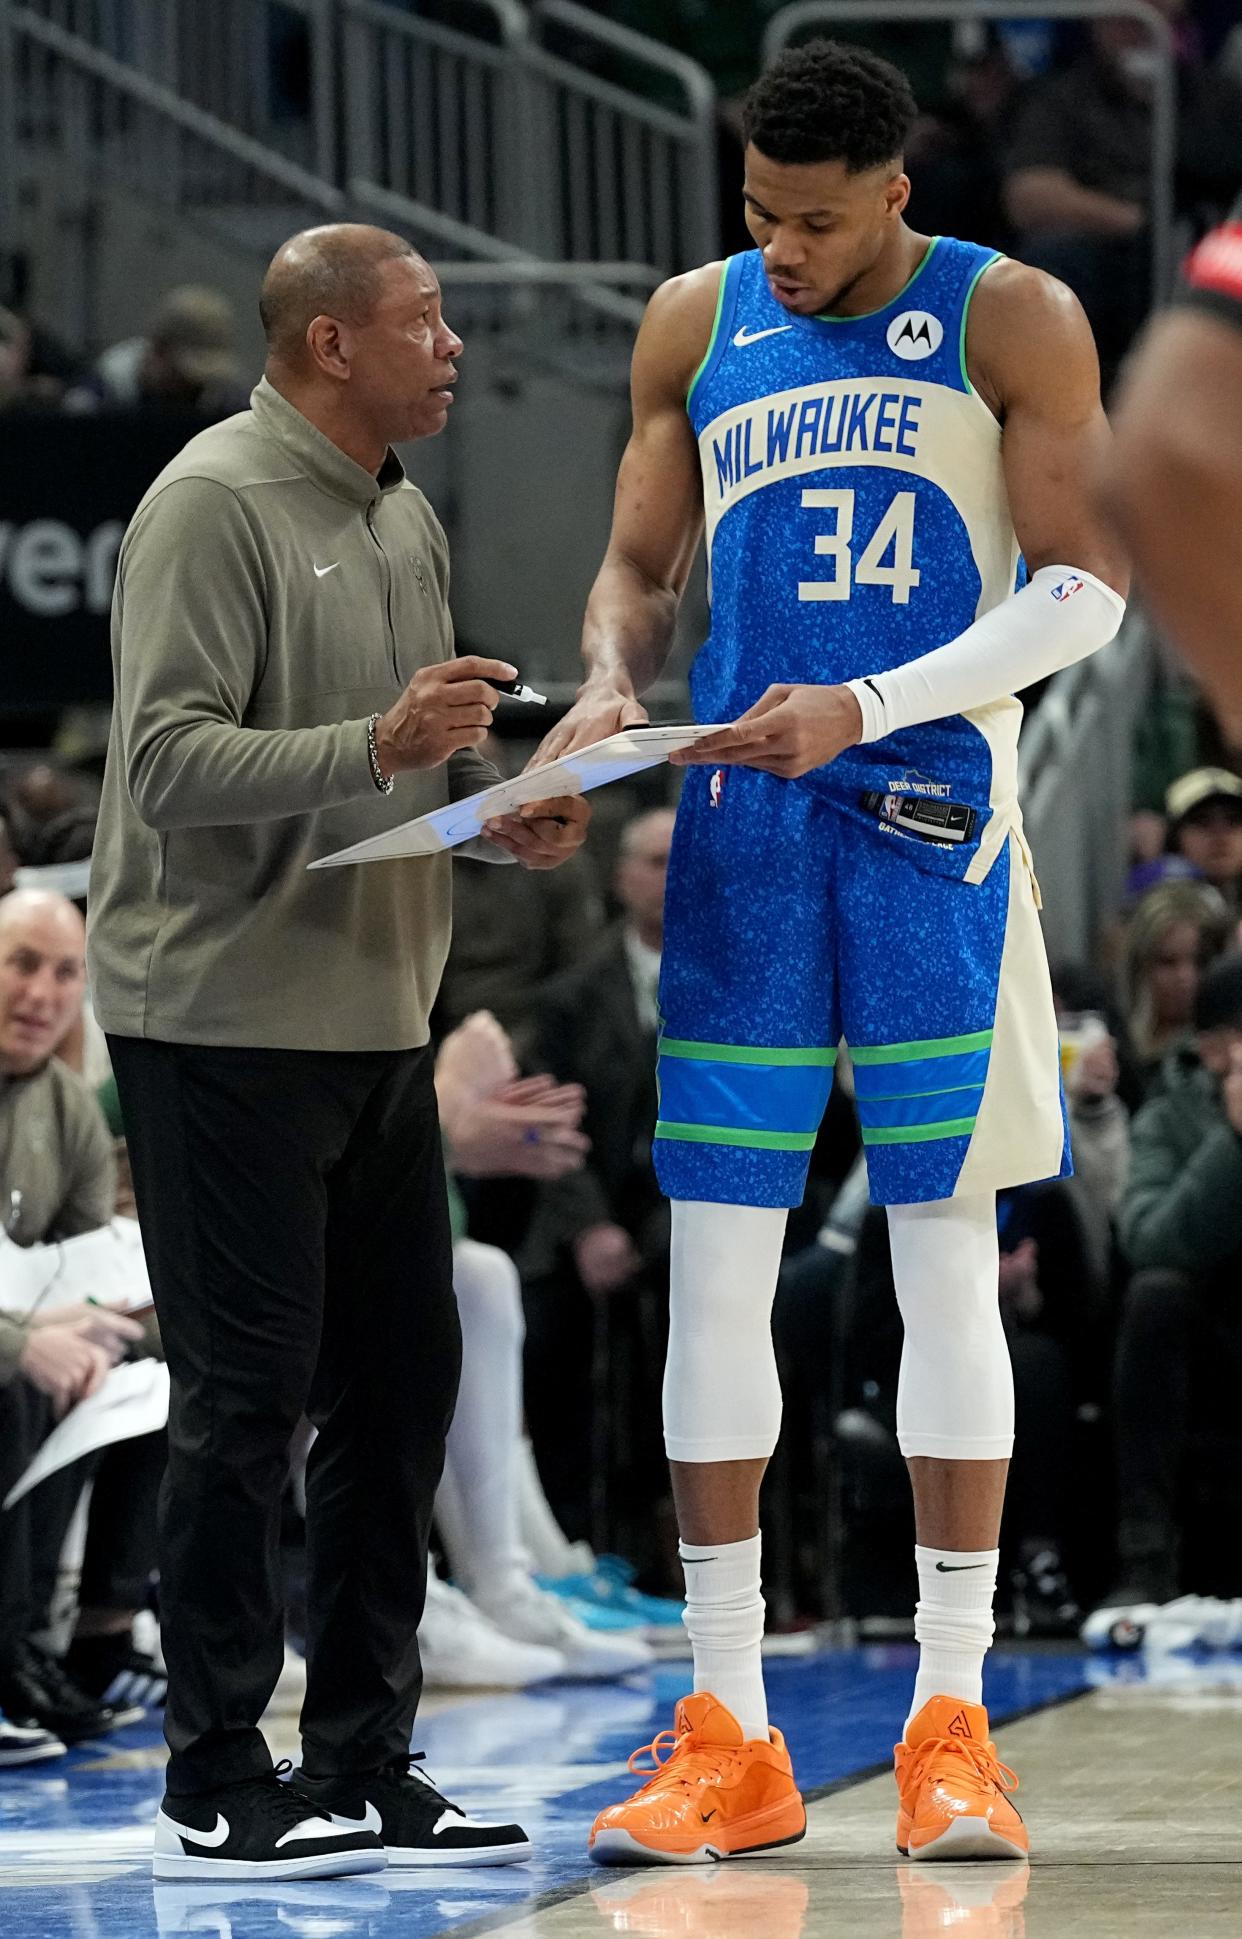 Bucks coach Doc Rivers is signed for the next three seasons, and Giannis Antetokounmpo is one of 10 players under contract for next season.